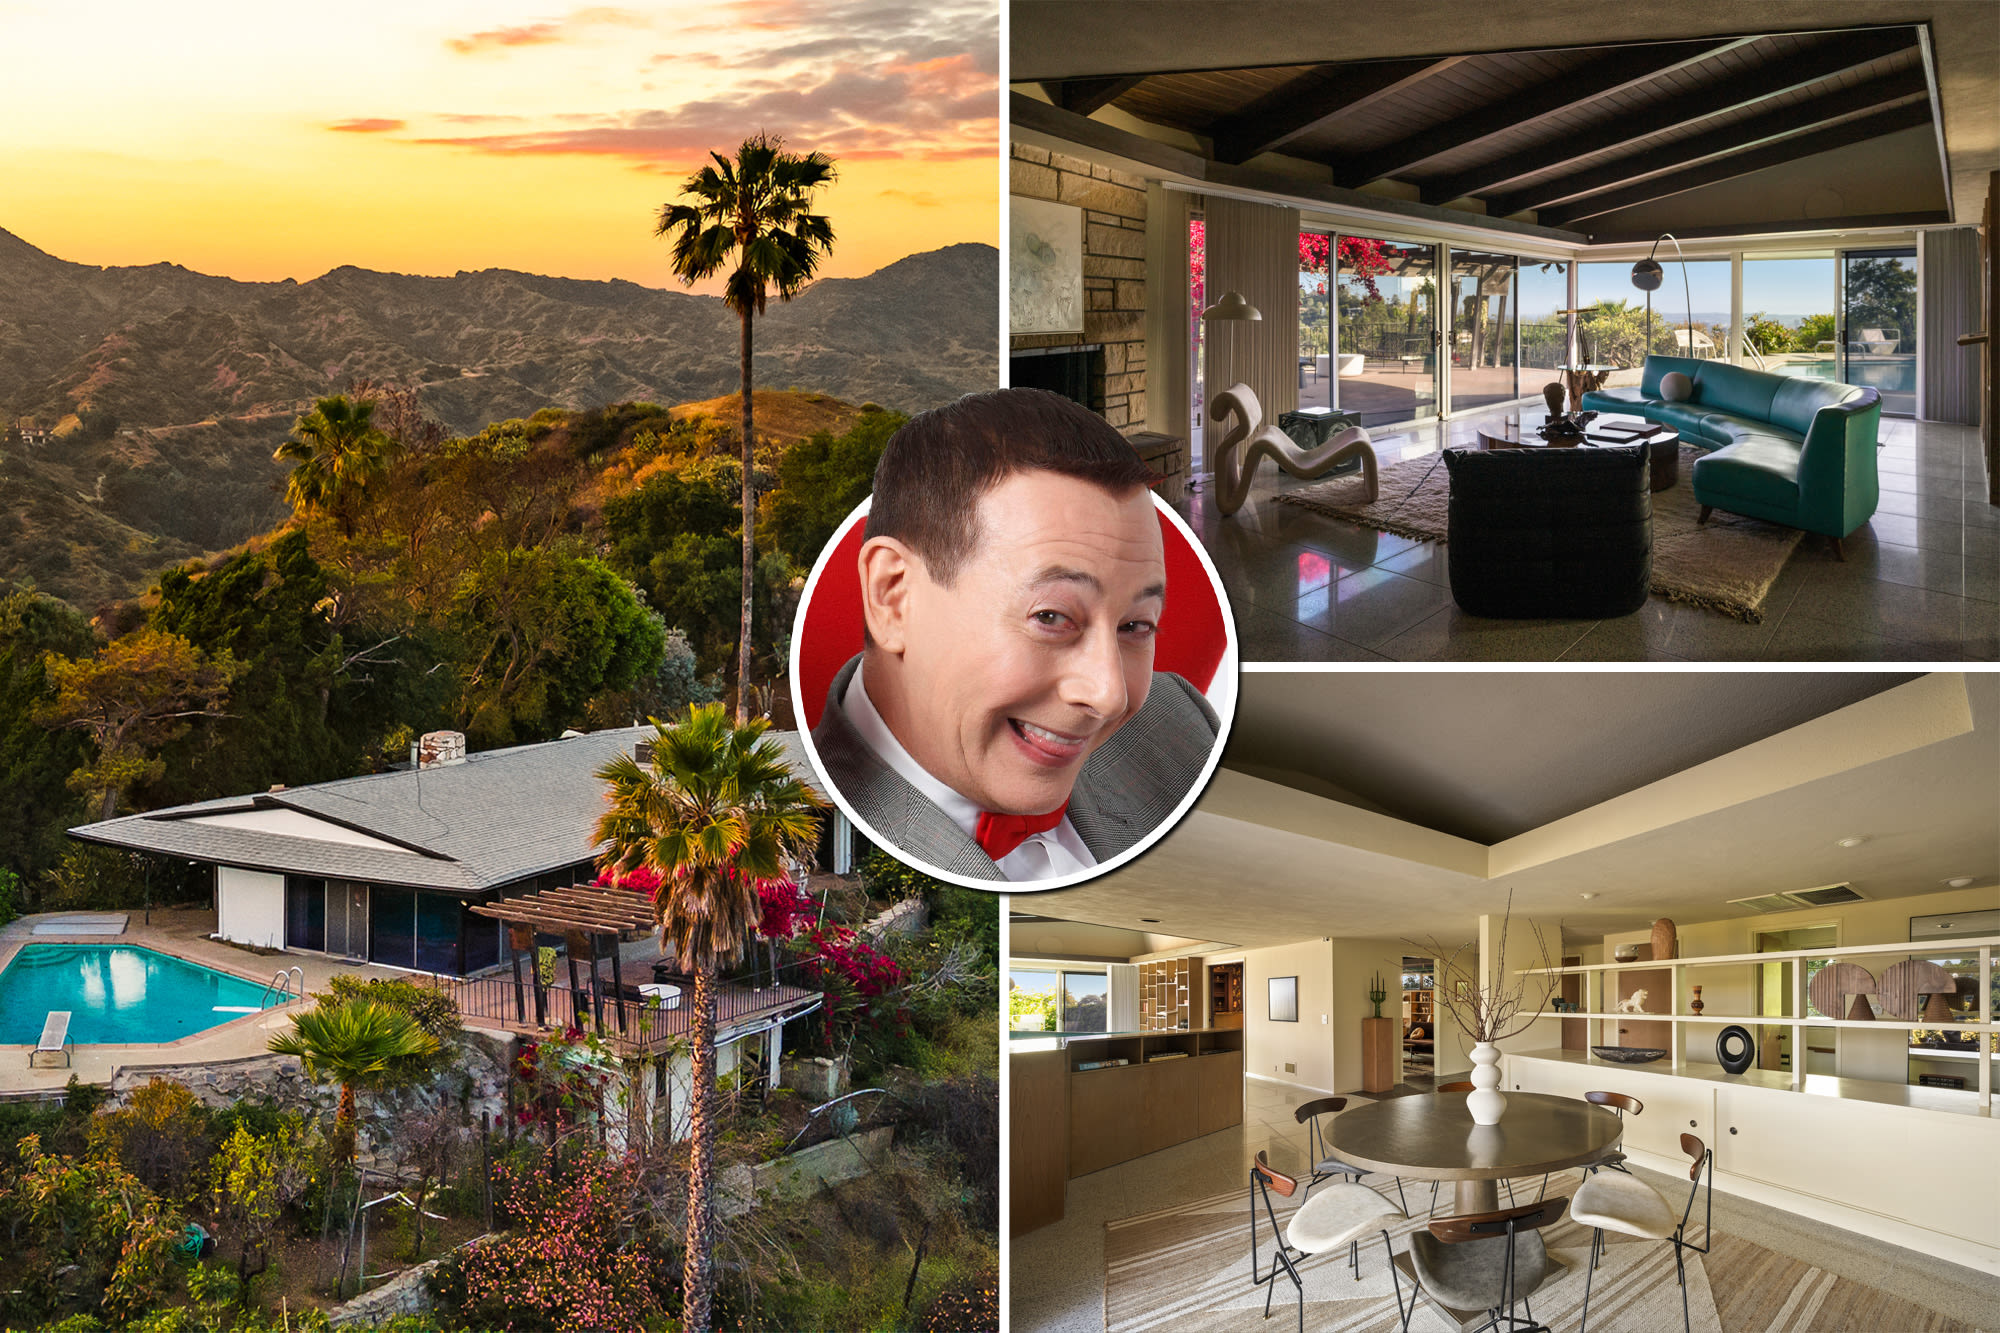 Paul Reubens’ LA home, which he bought with the earnings of ‘Pee-wee’s Big Adventure,’ lists for $4.99M